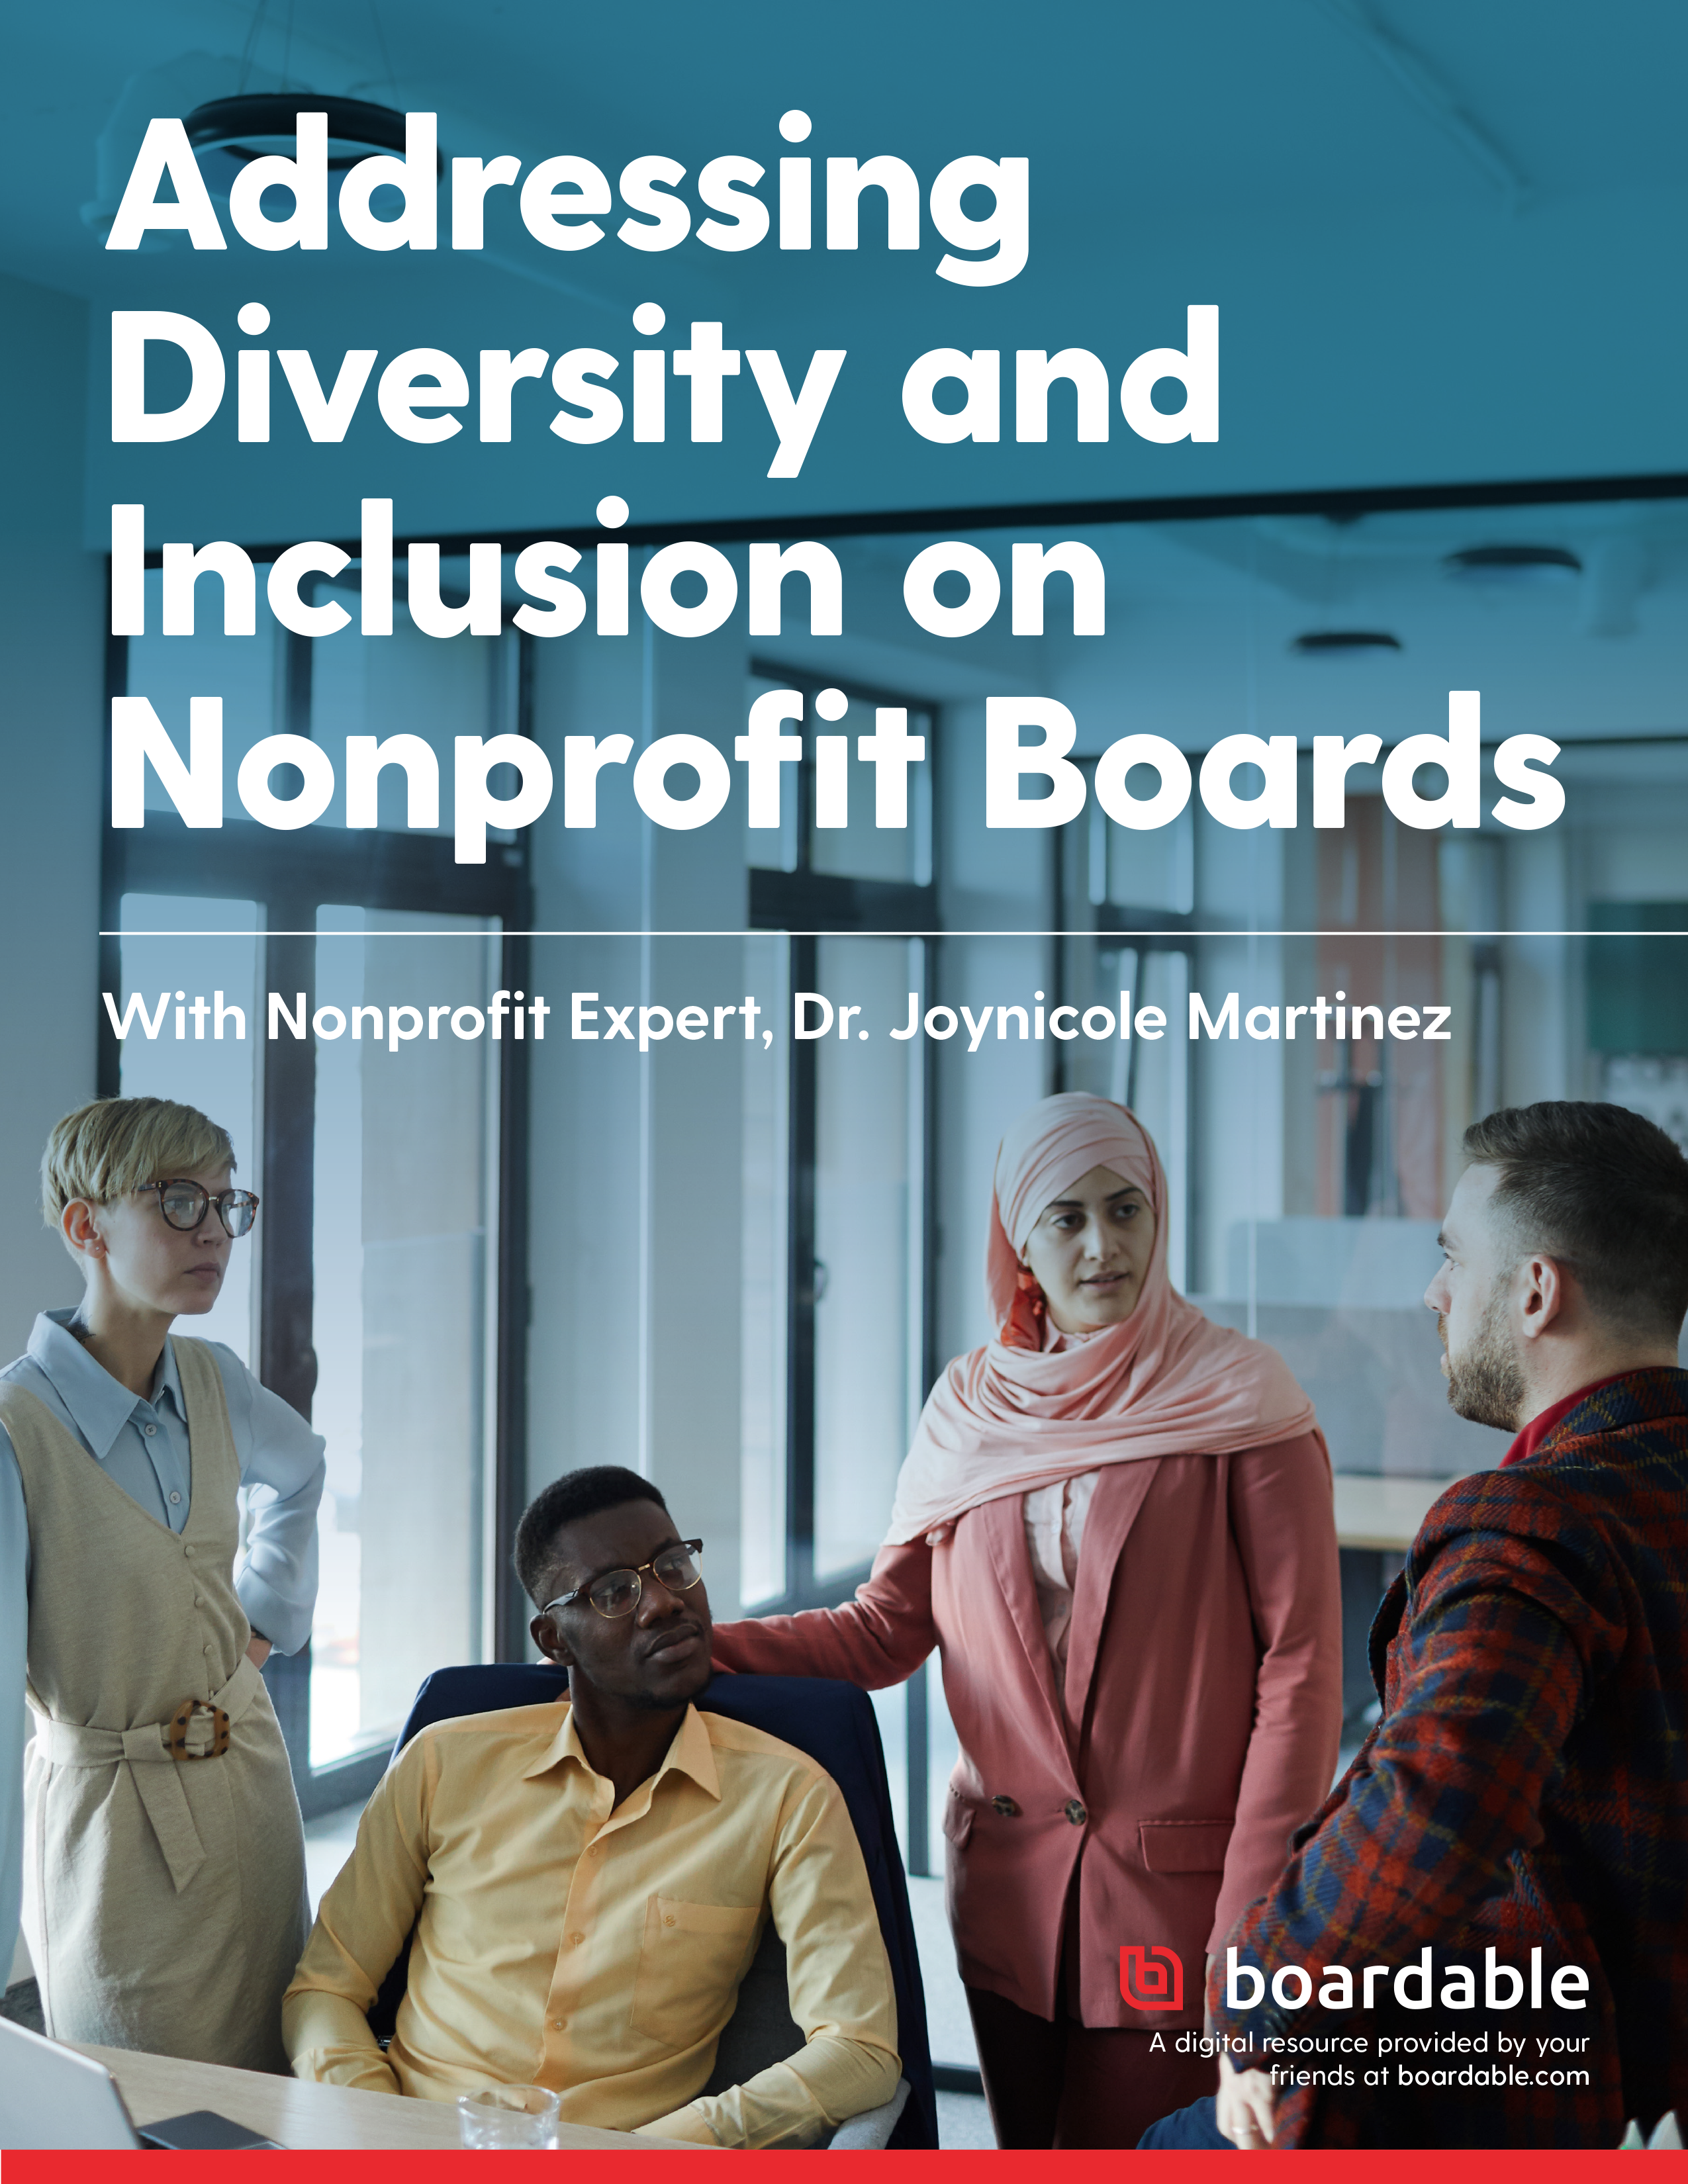 Diversity and inclusion on a nonprofit board of directors requires time and effort.